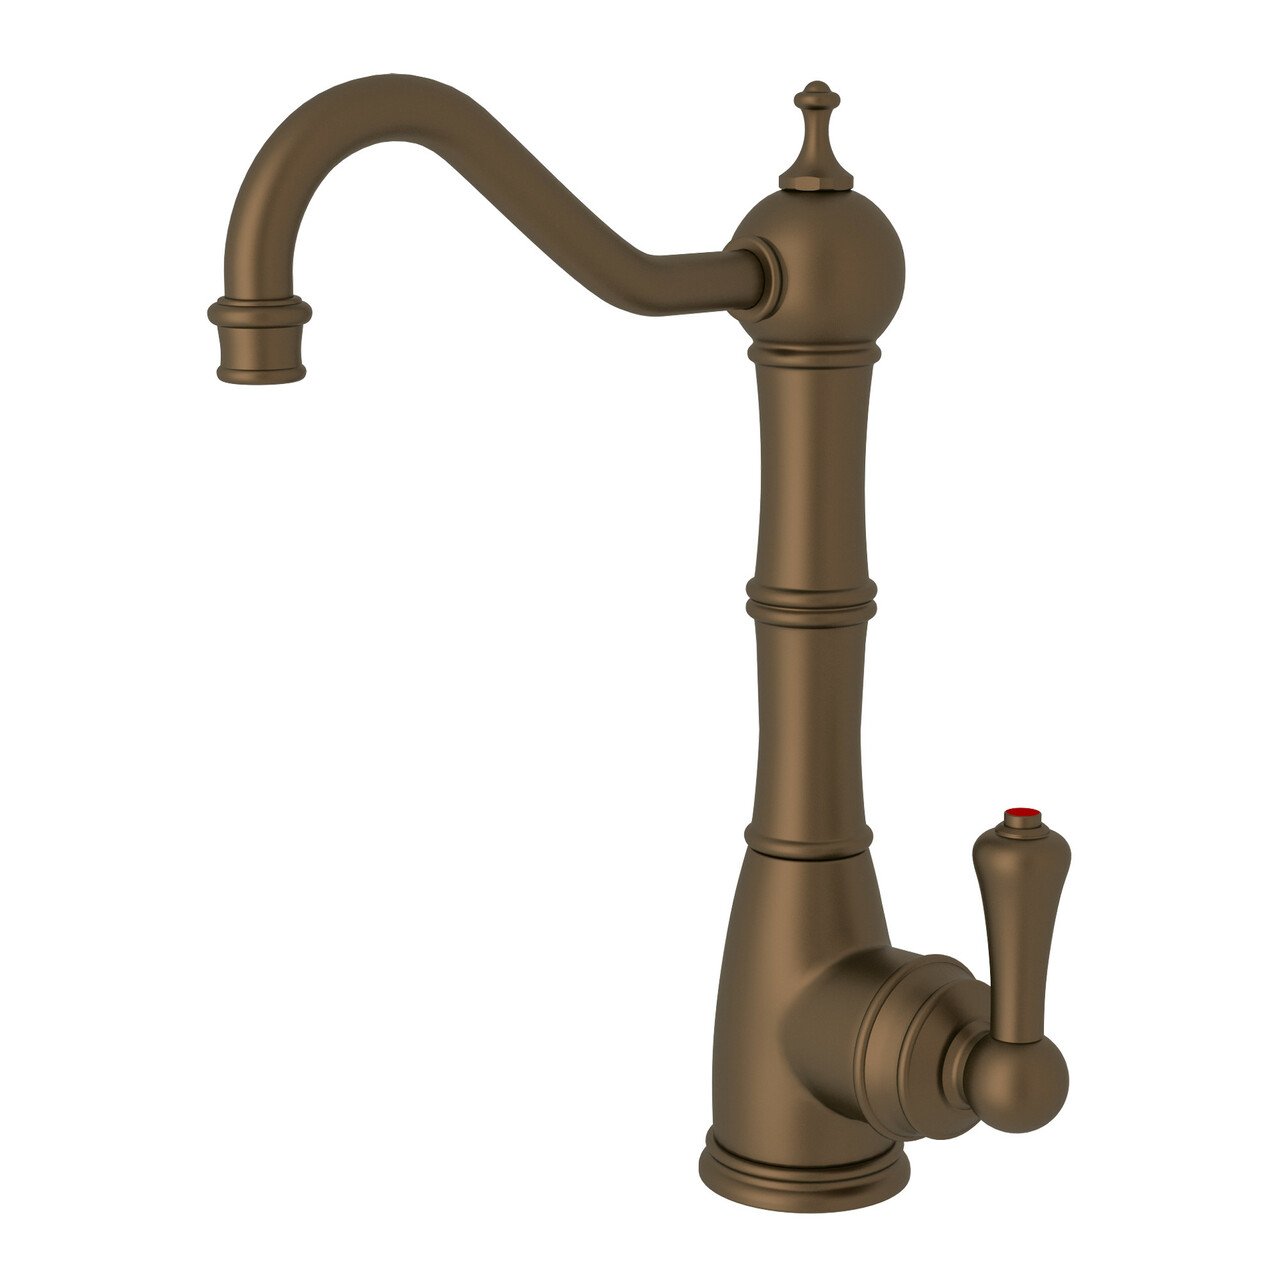 Perrin & Rowe Edwardian Column Spout Hot Water Faucet - BNGBath